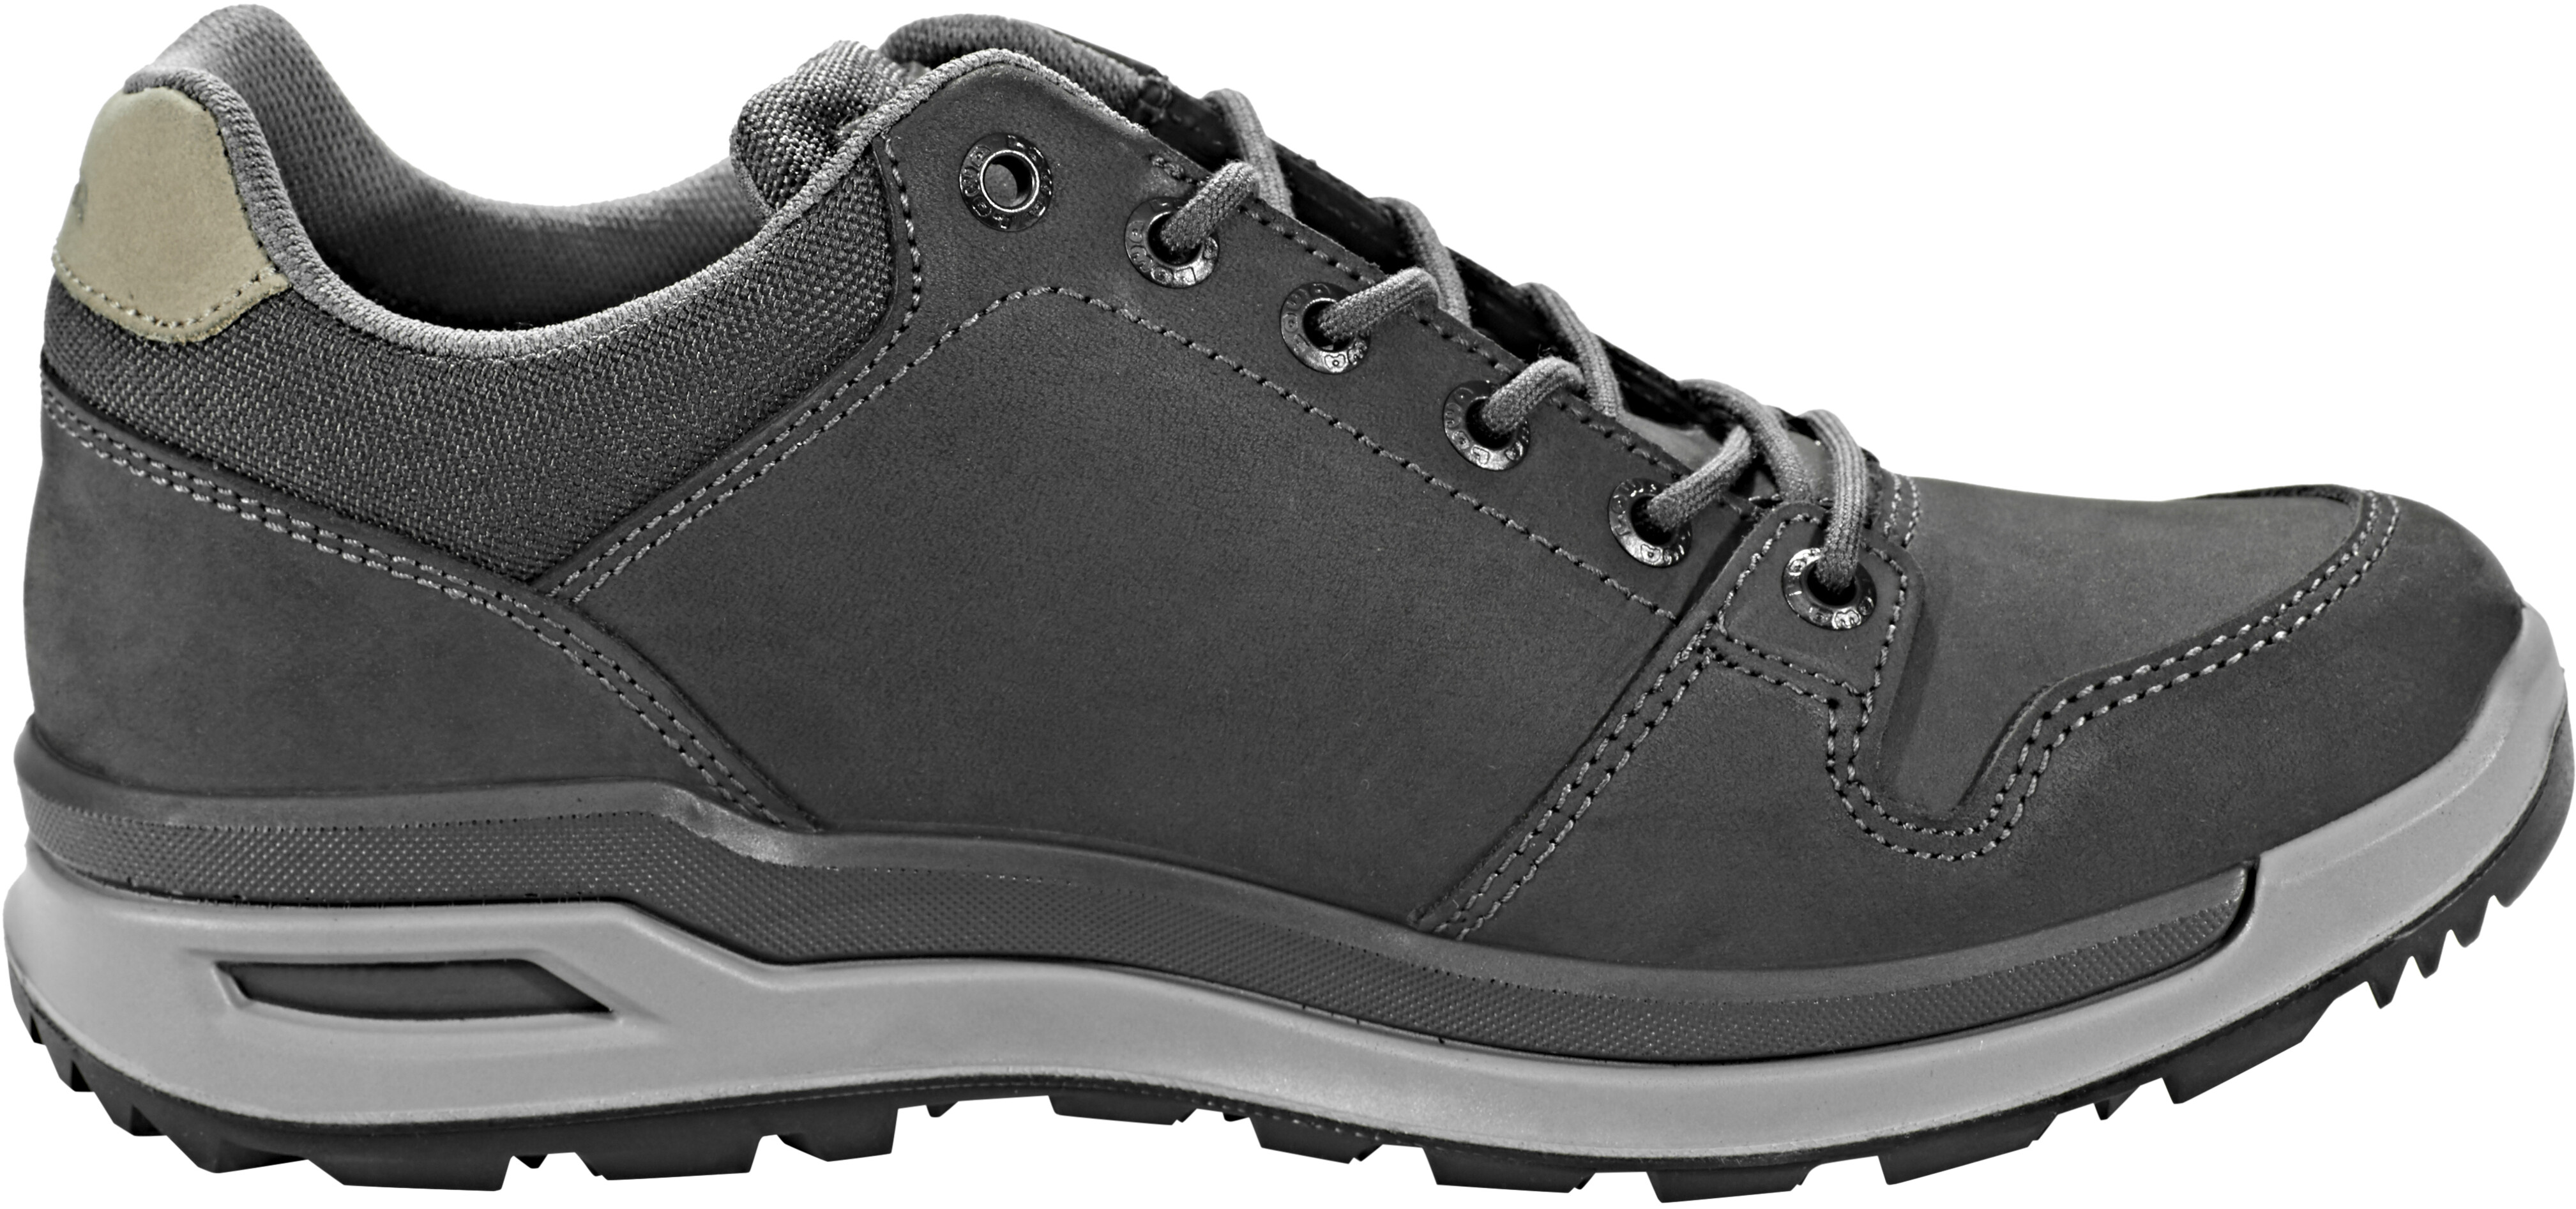 Lowa Locarno GTX Low Shoes Men anthracite at addnature.co.uk